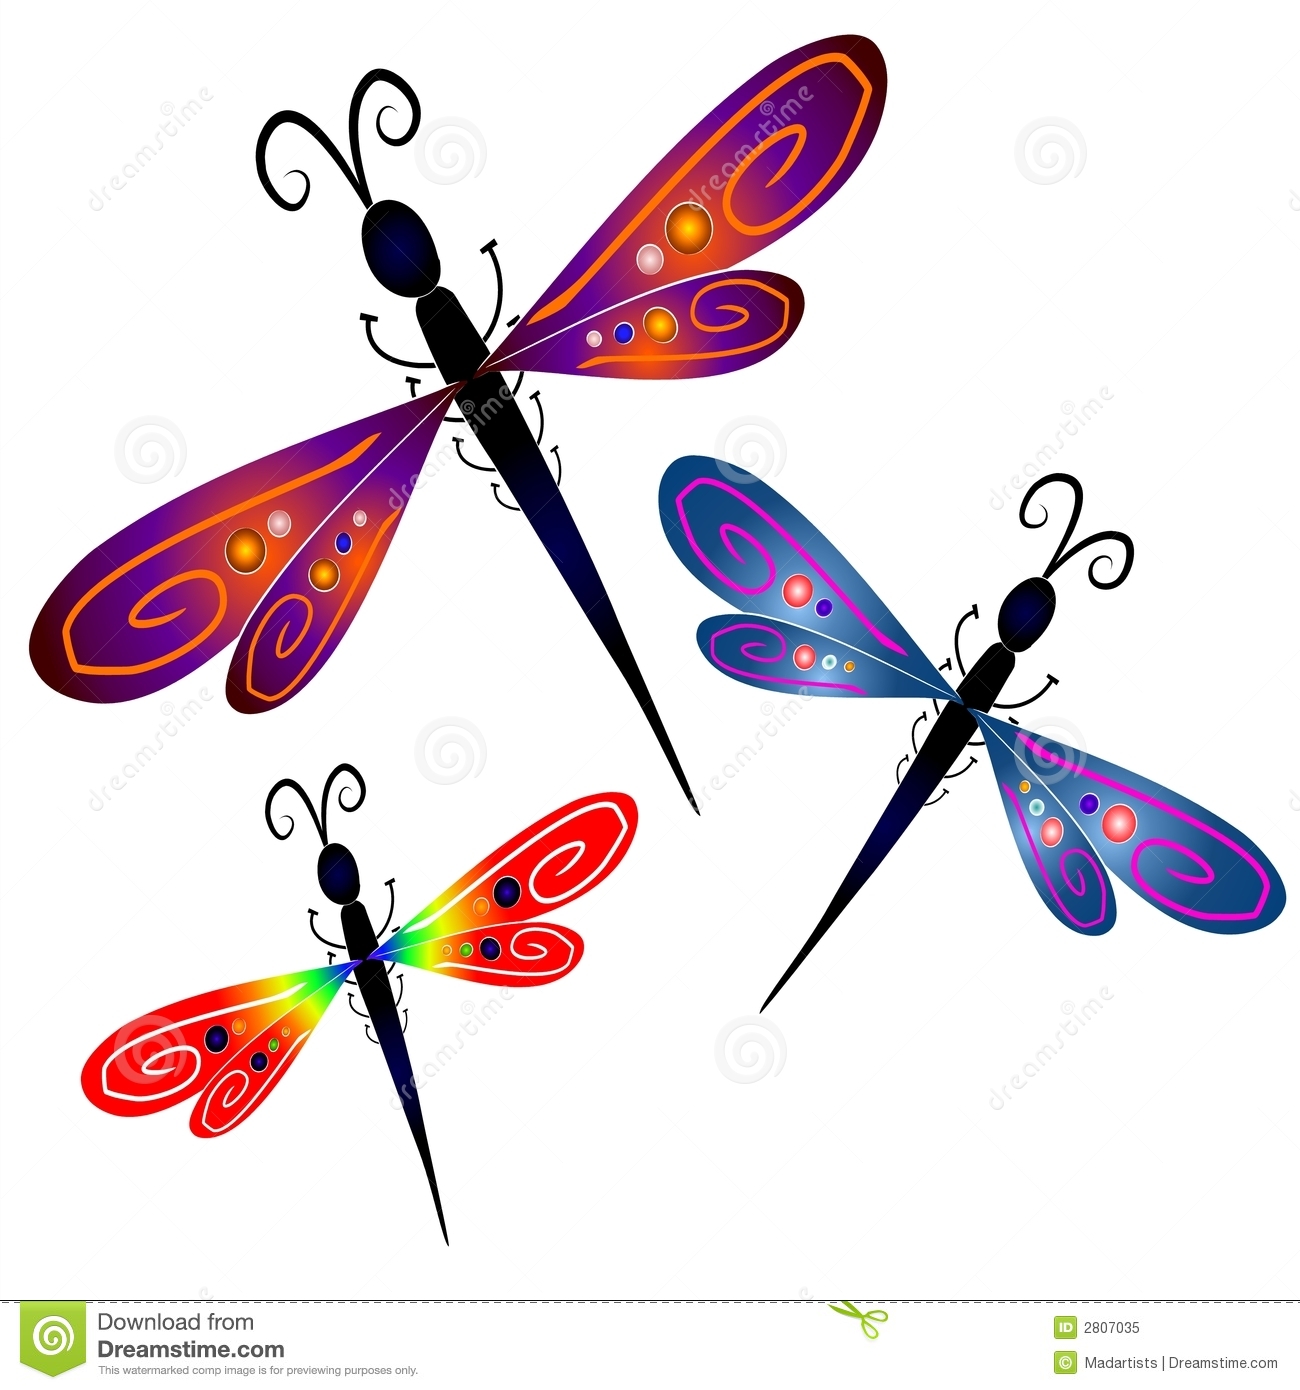 Dragonfly clipart #11, Download drawings